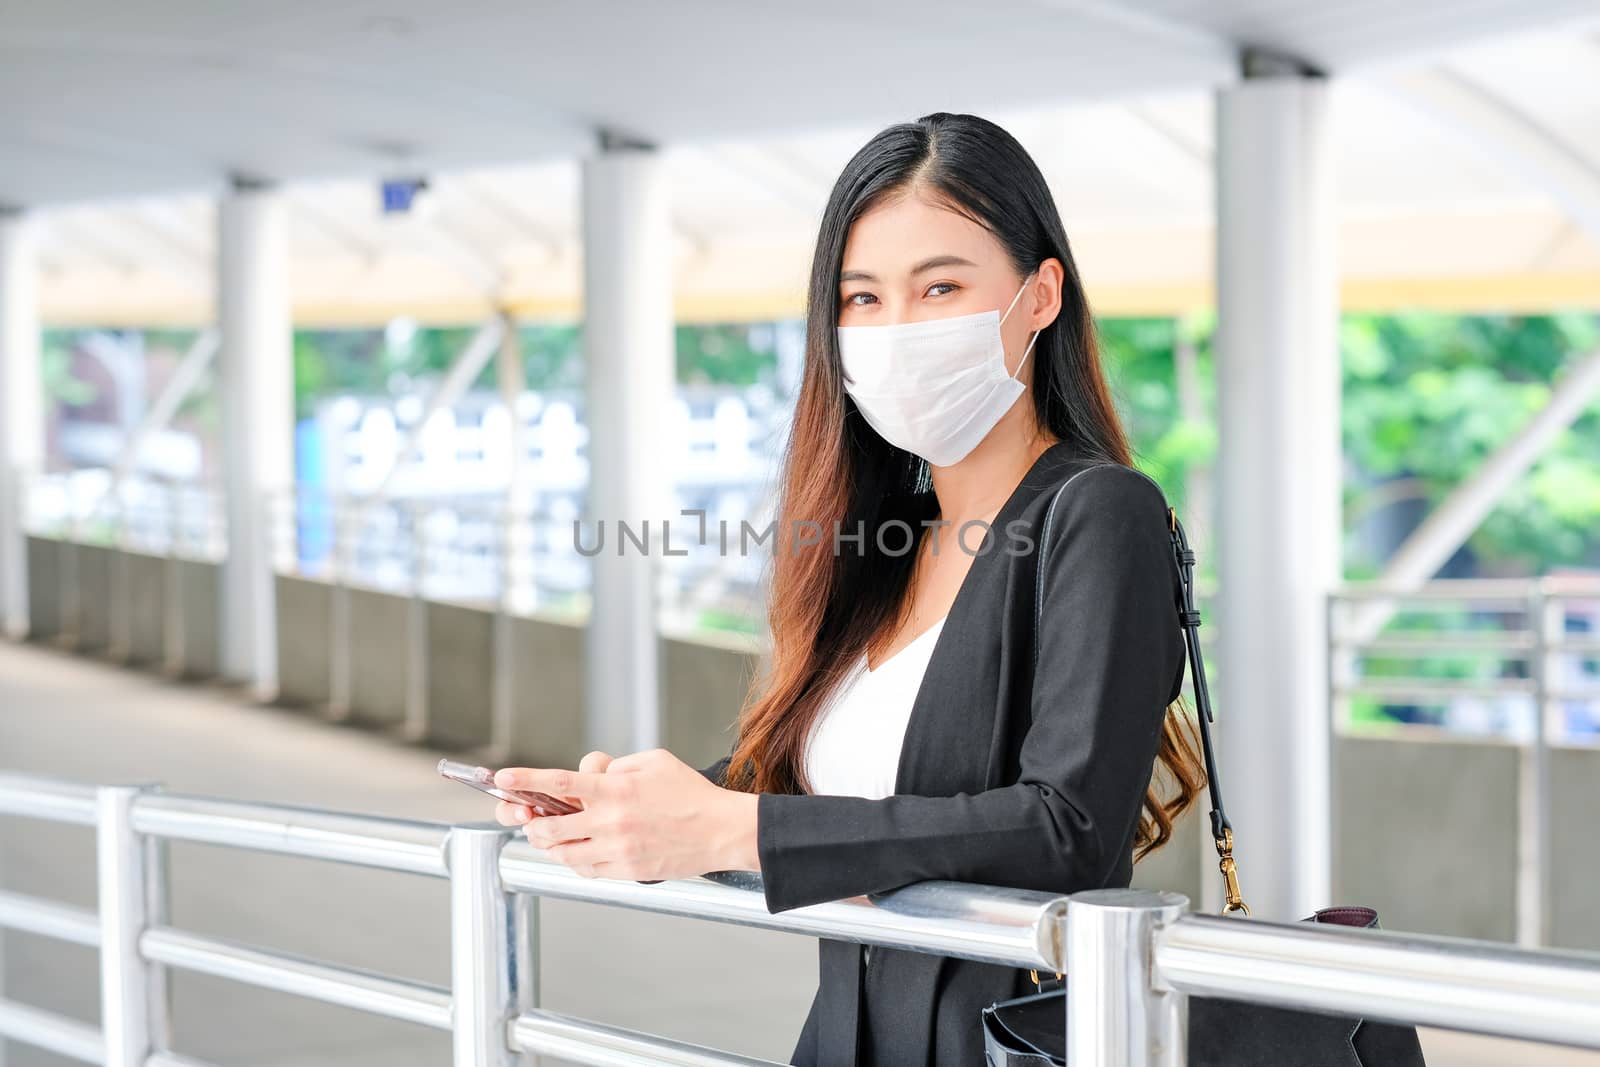 Portrait of business woman with hygiene mask stand along walk way and hold mobile phone, she also look forward and look relax during covid-19 pandemic in the city.